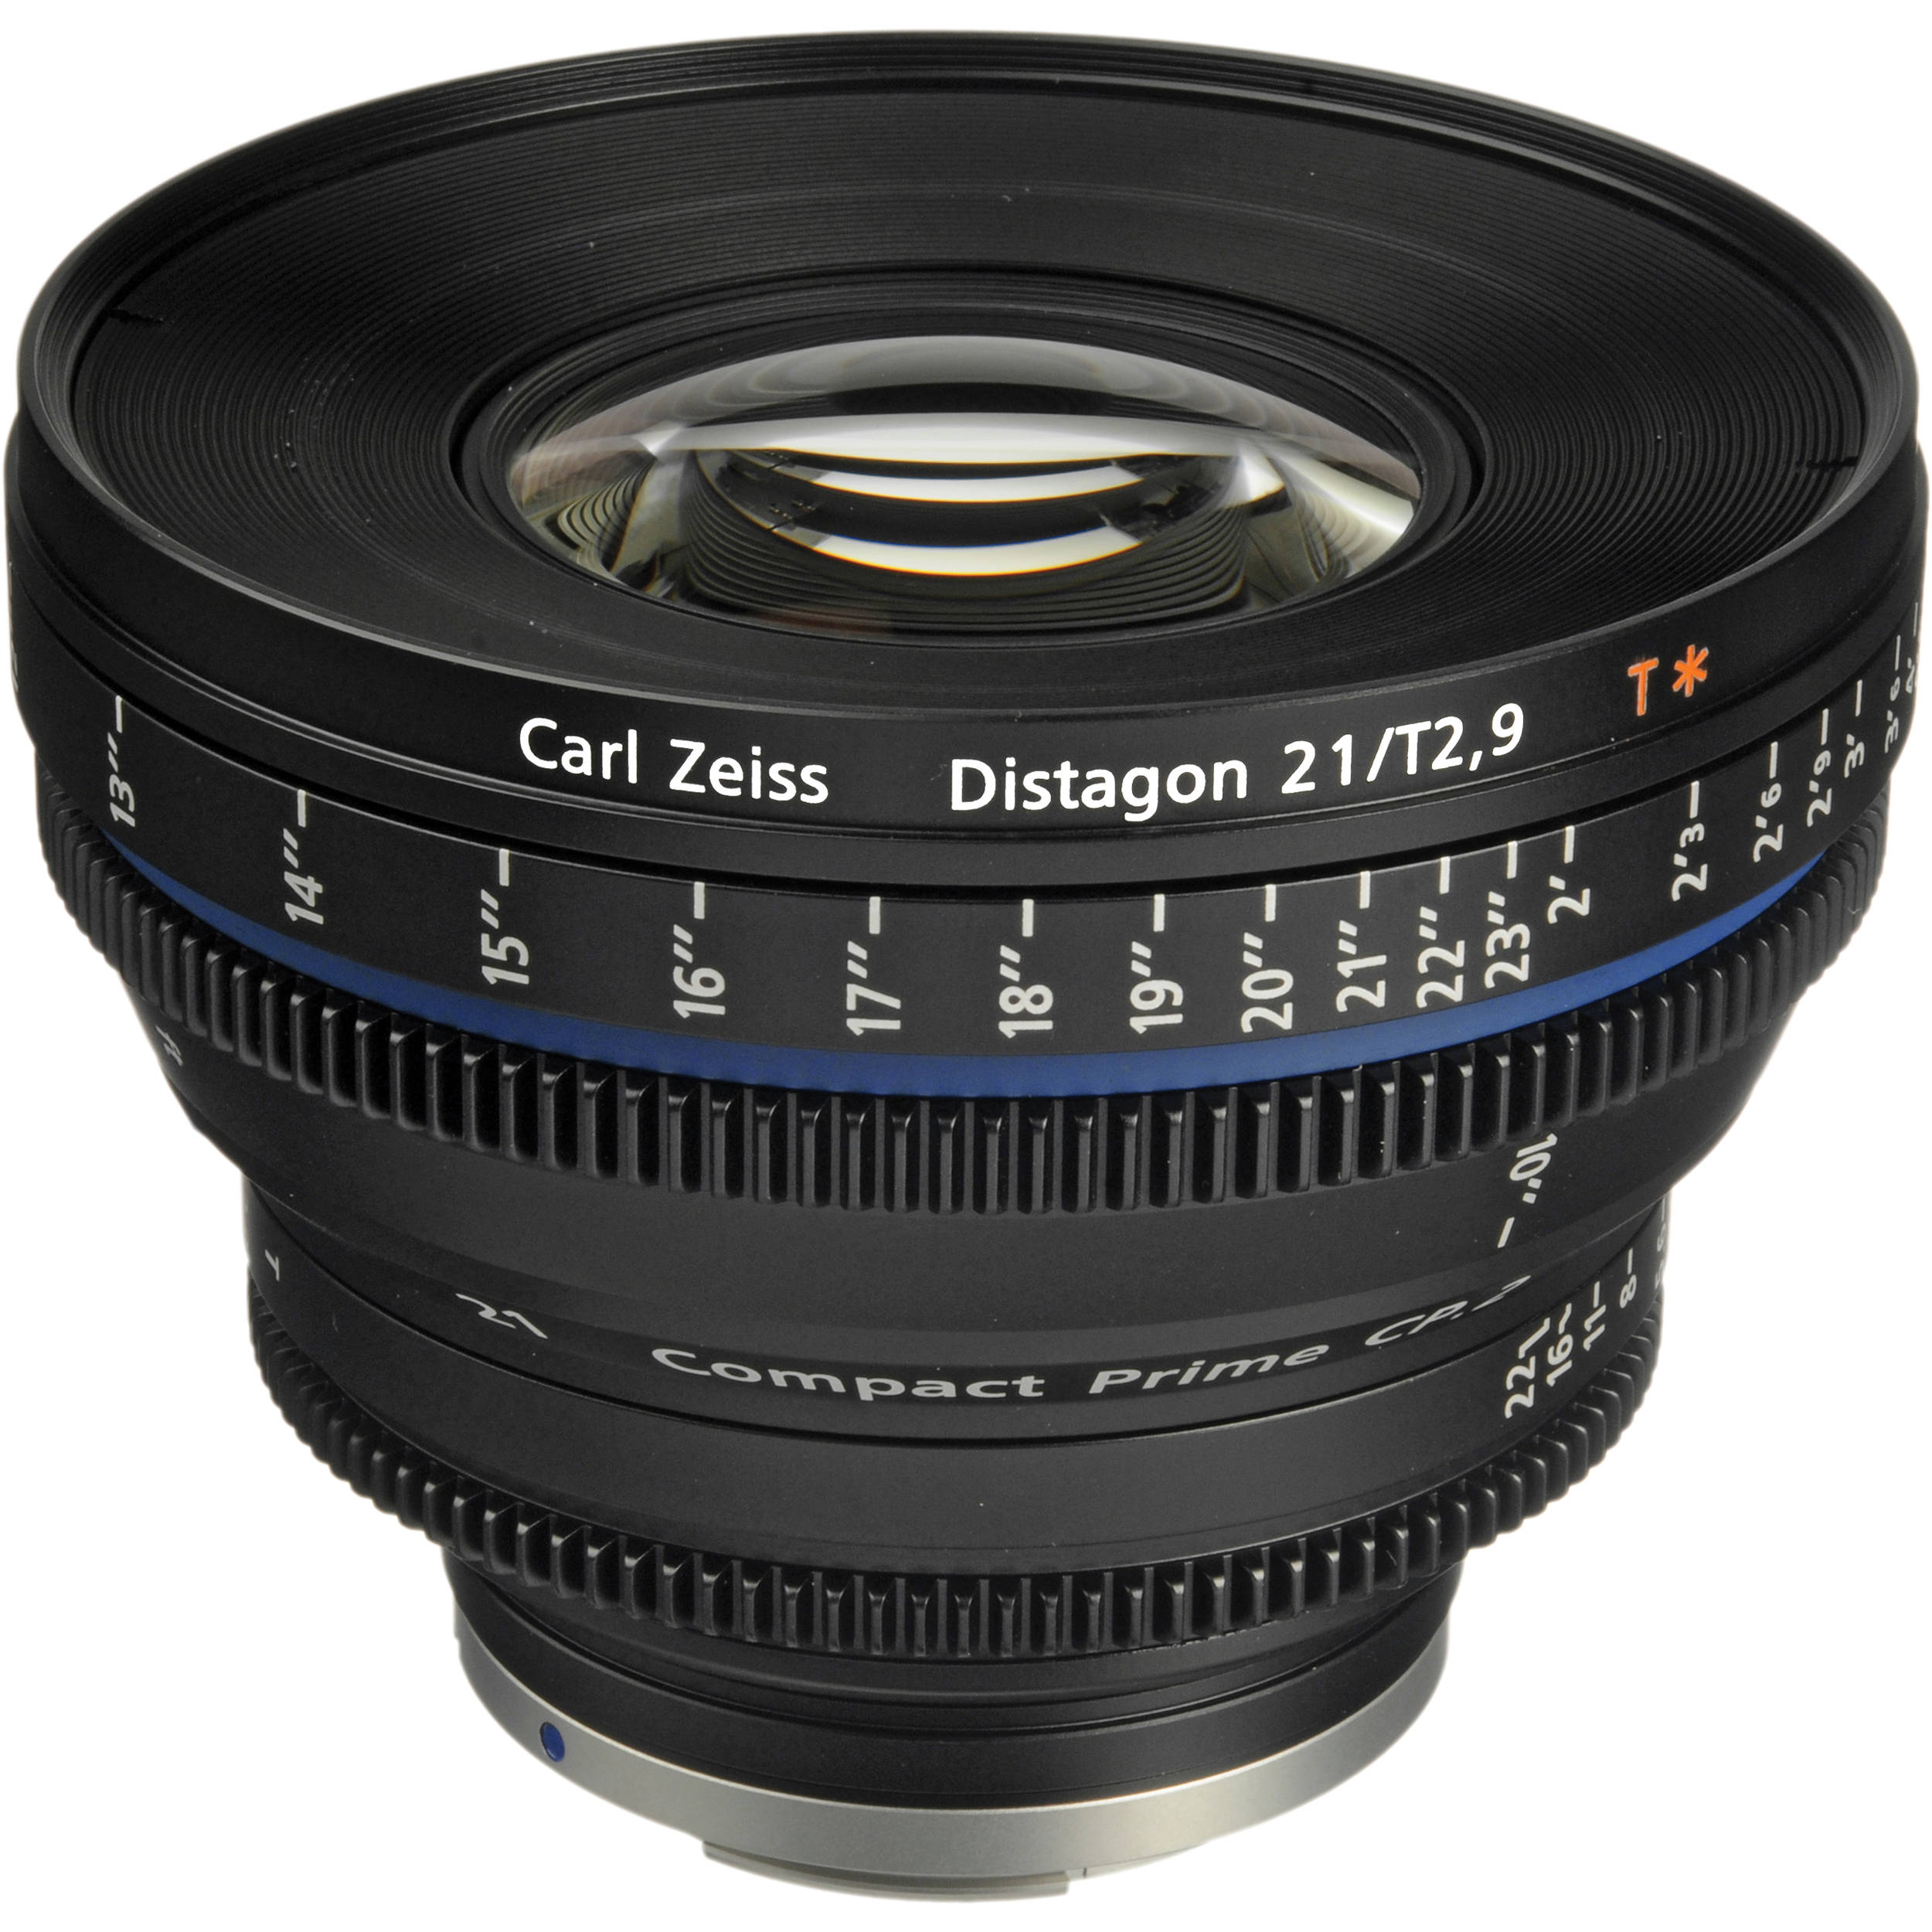 ZEISS Compact Prime CP.2 21mm/T2.9 Cine Lens (EF Mount